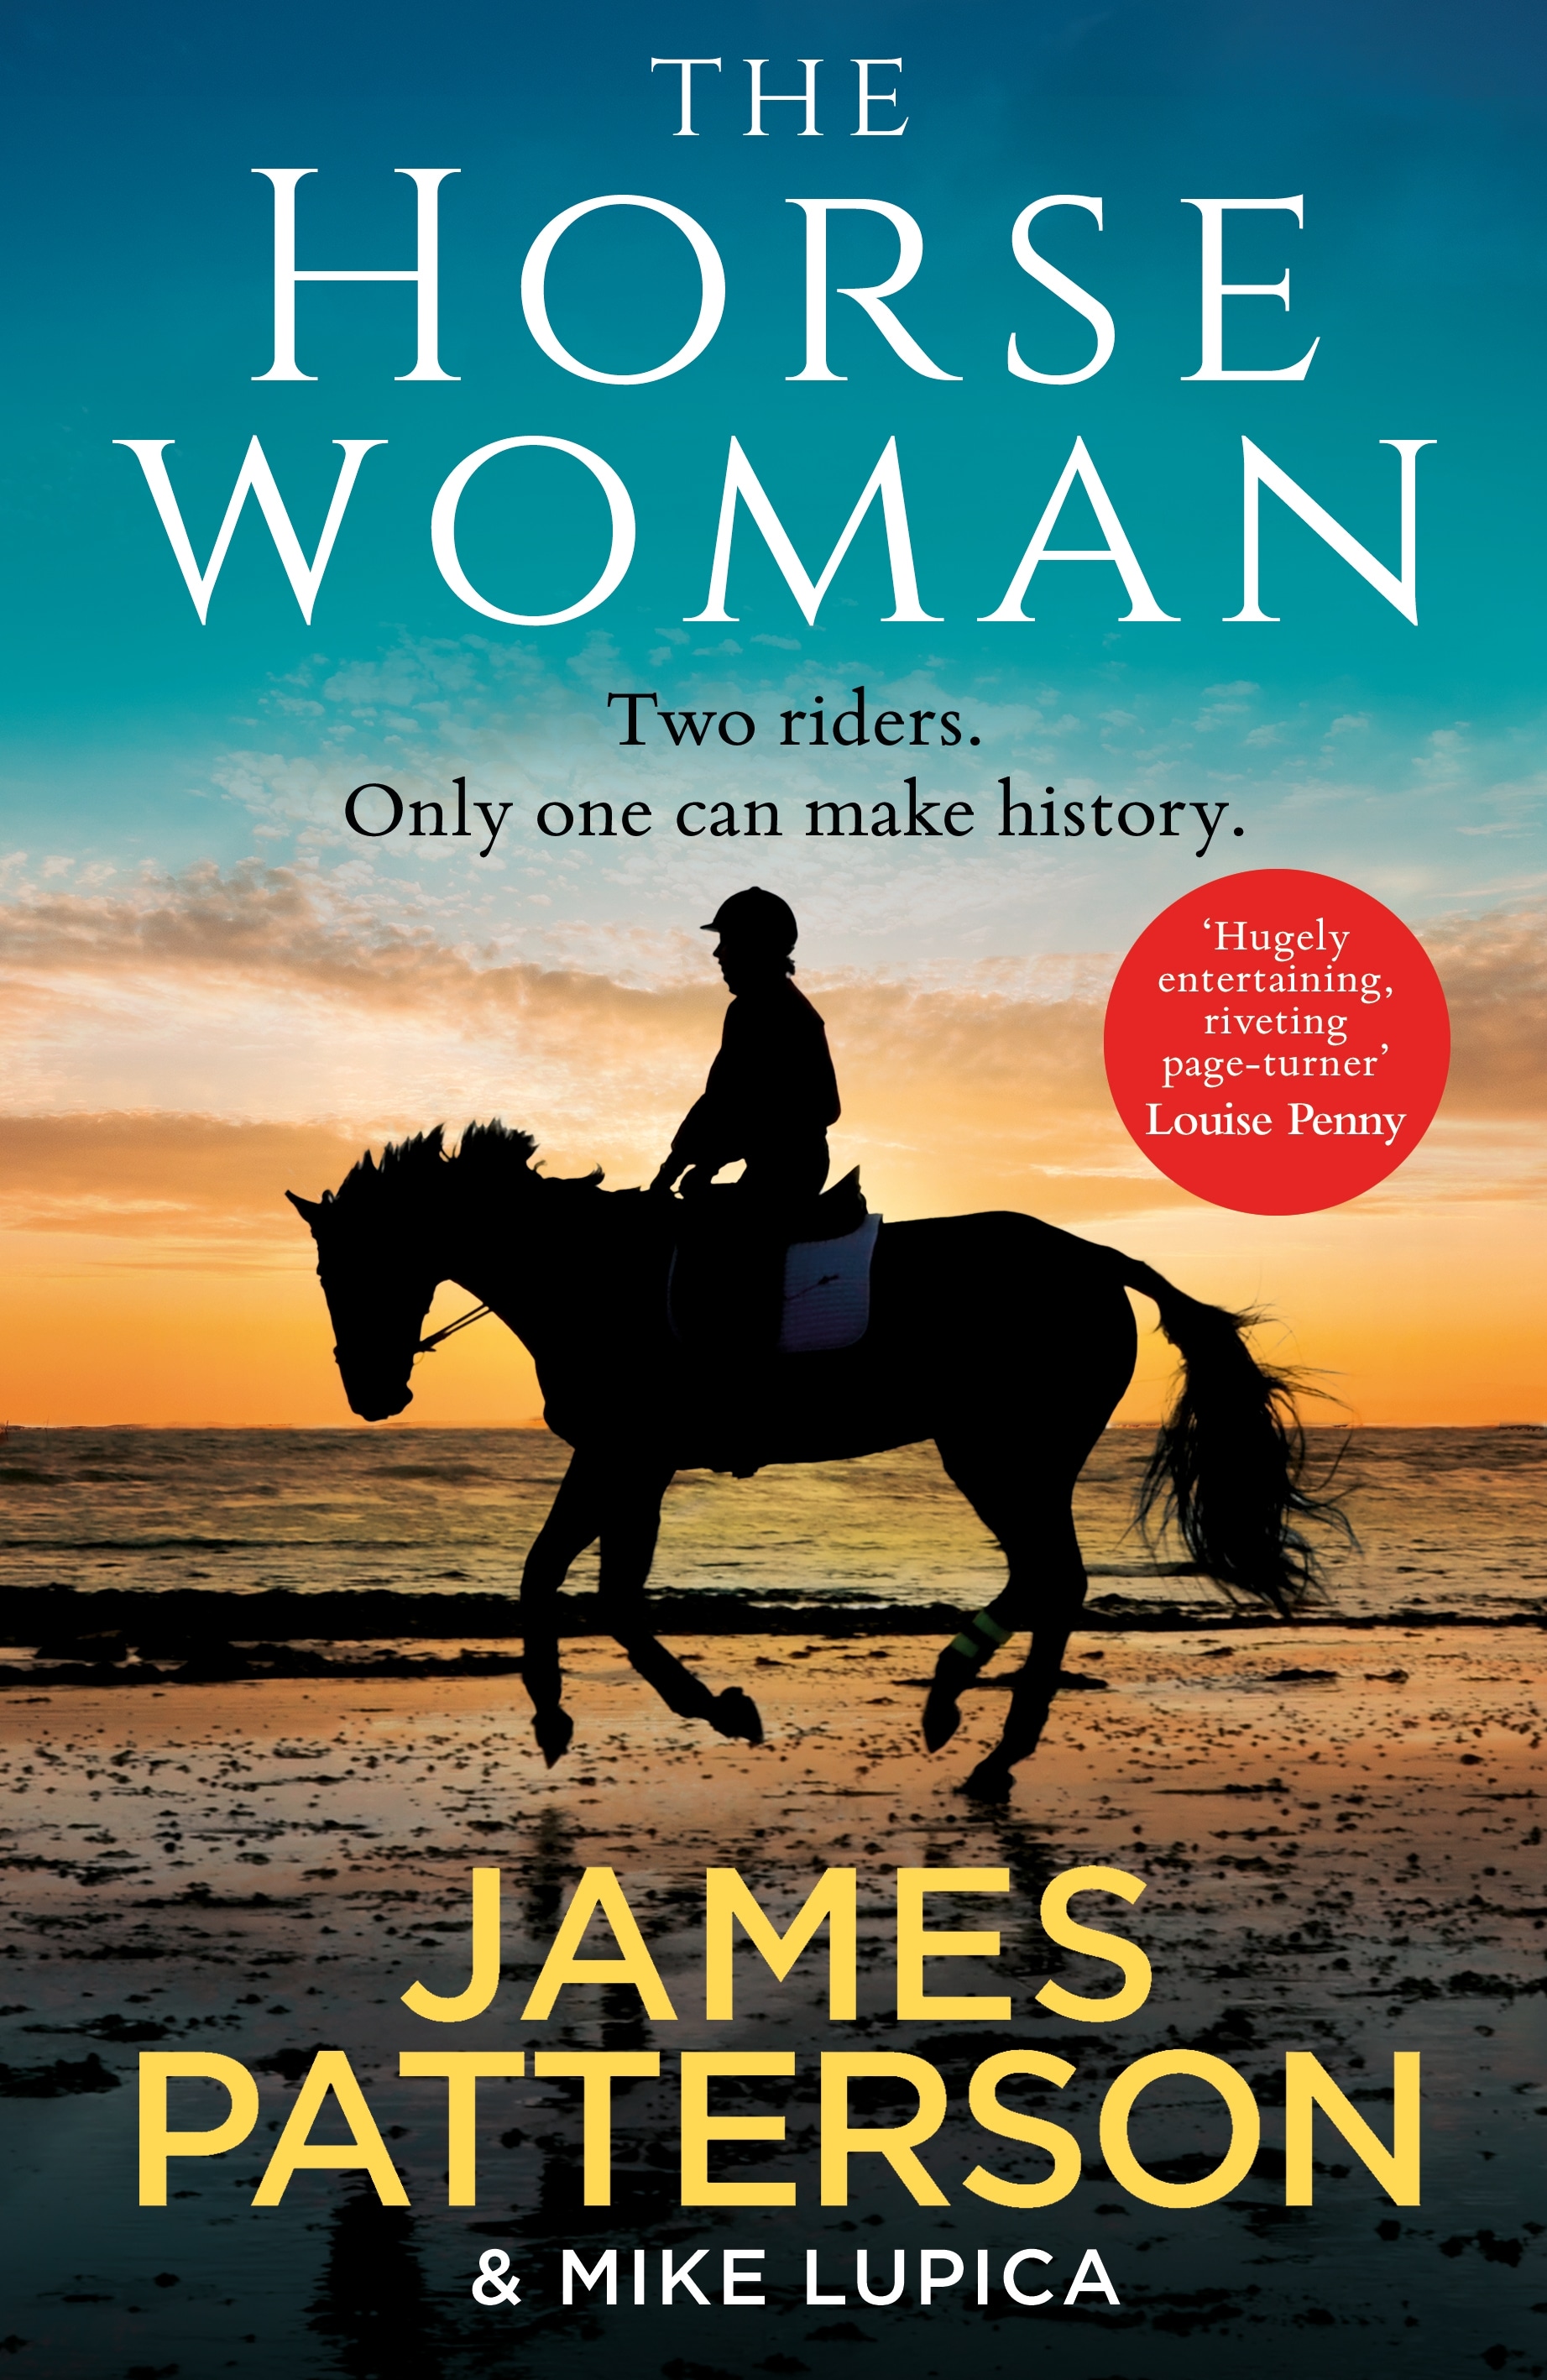 Book “The Horsewoman” by James Patterson — December 30, 2021